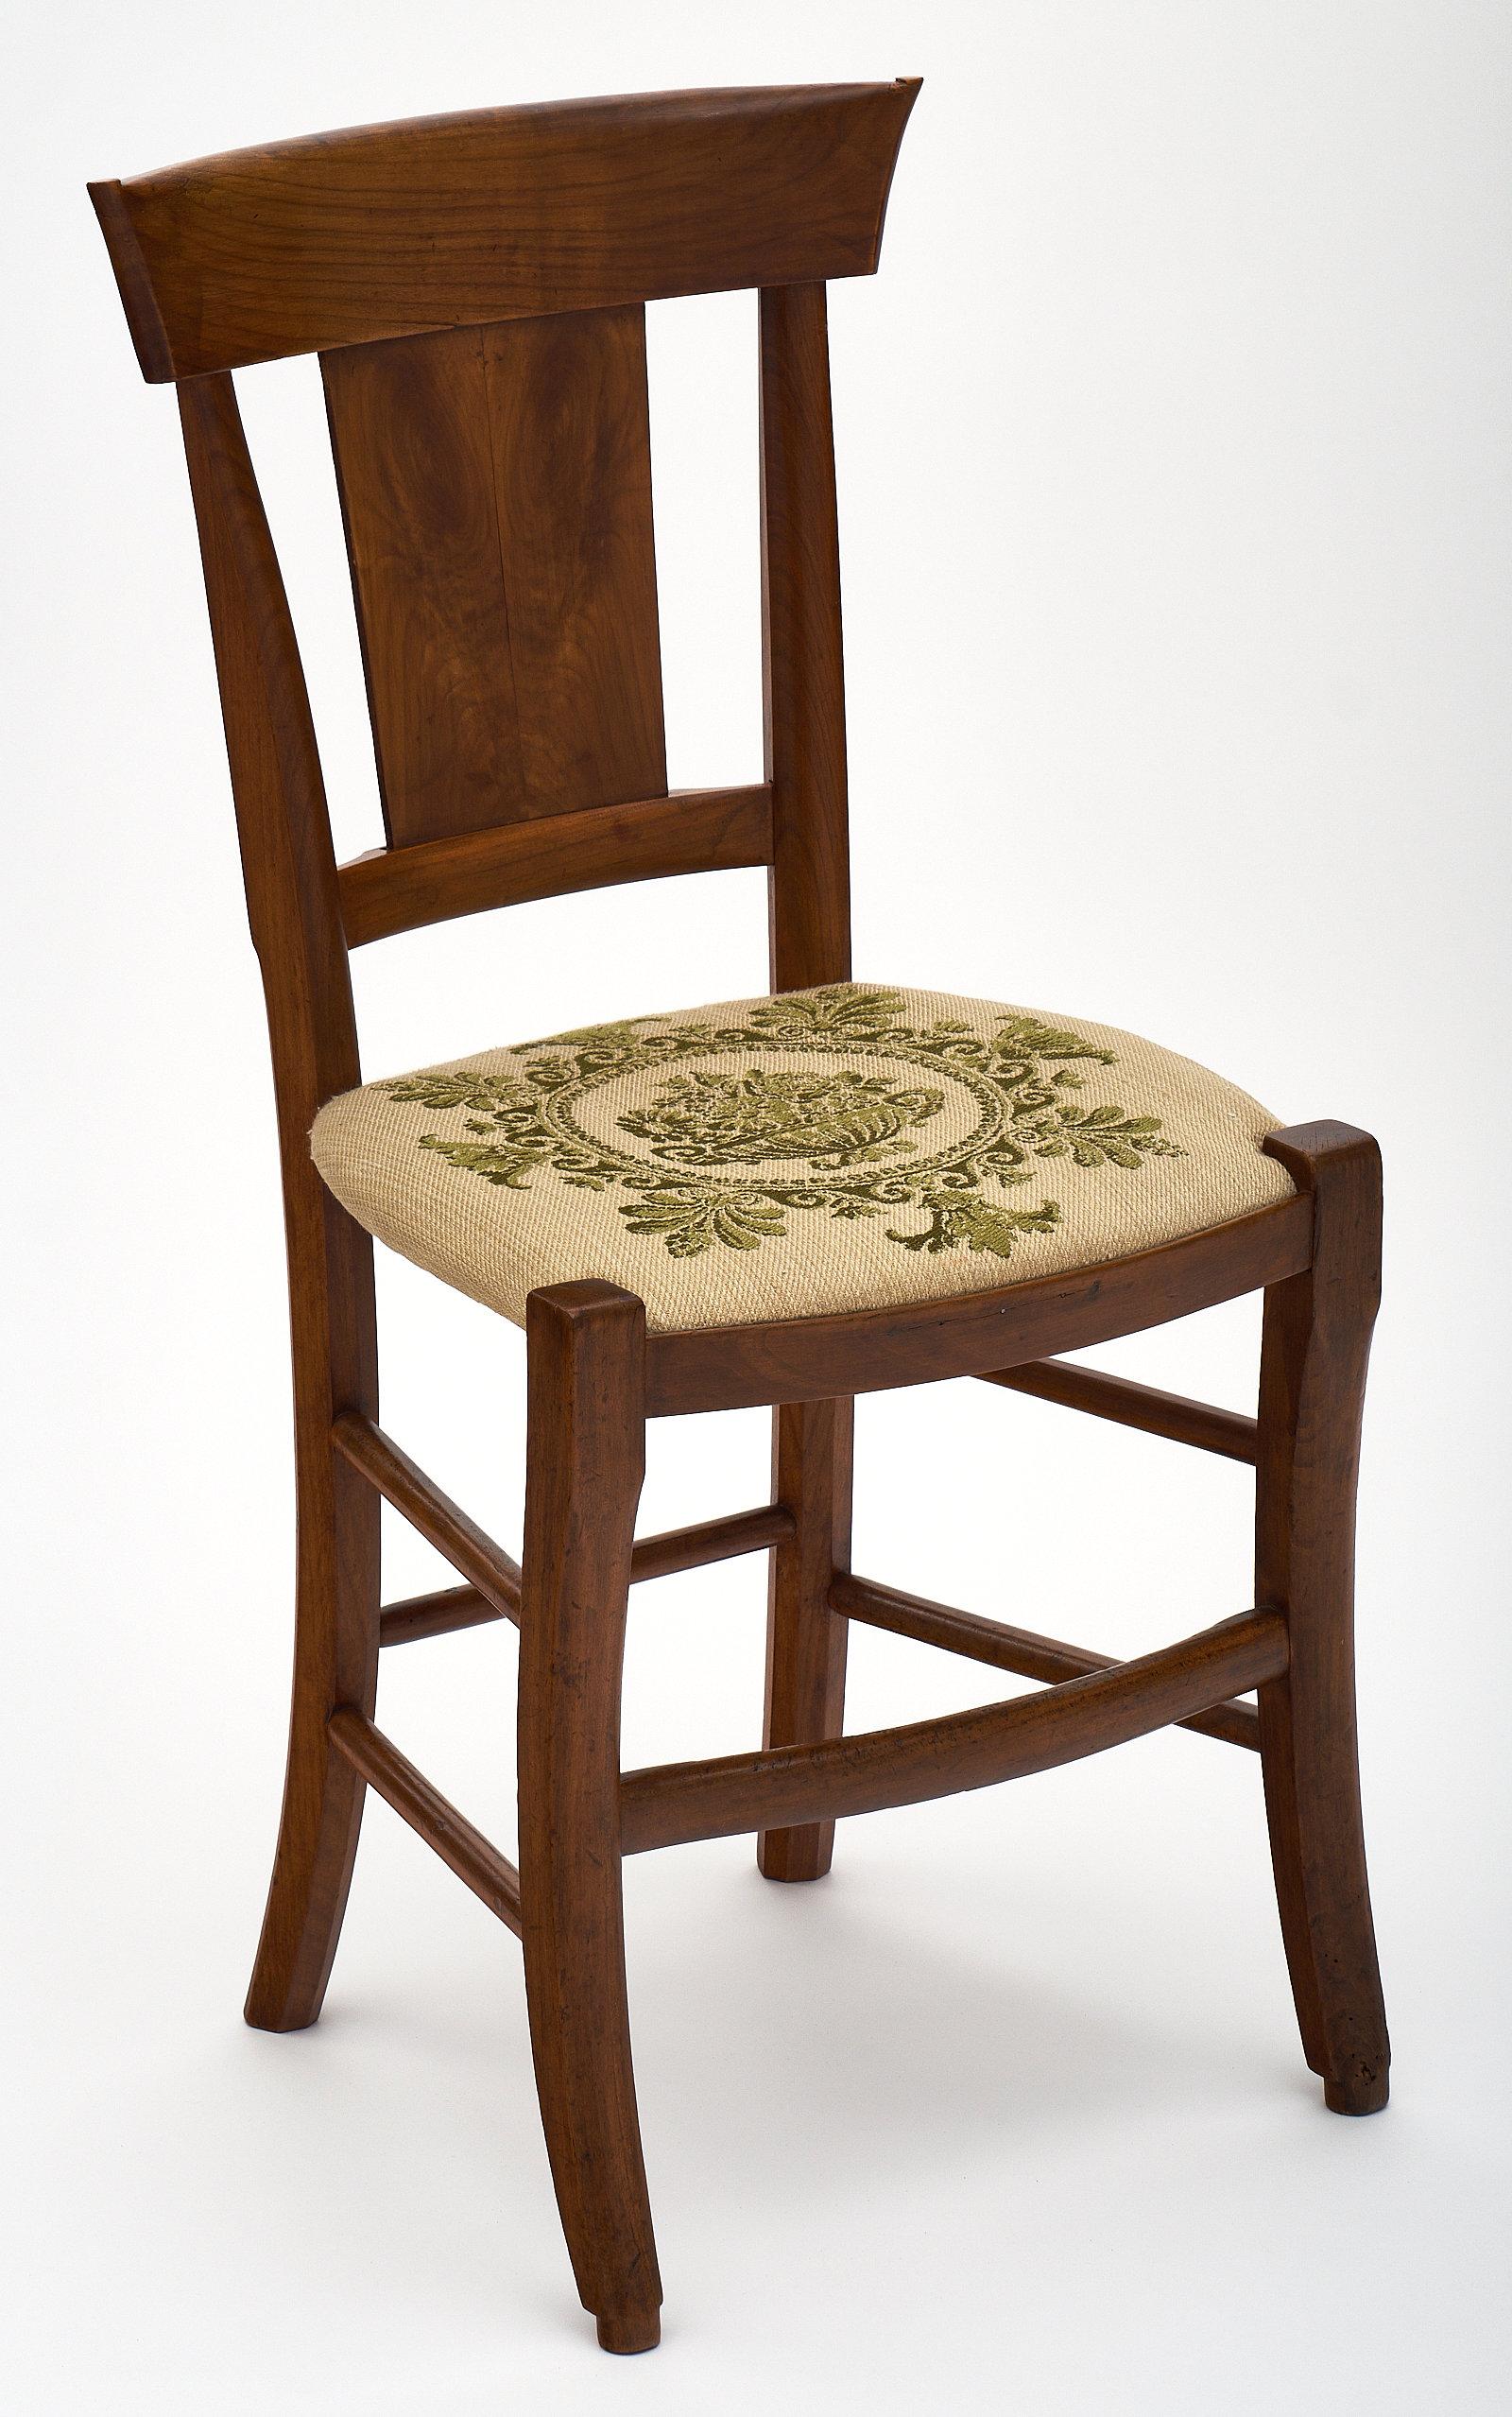 A set of six Directoire period walnut dining chairs with beautiful classic lines and a seat covered with 